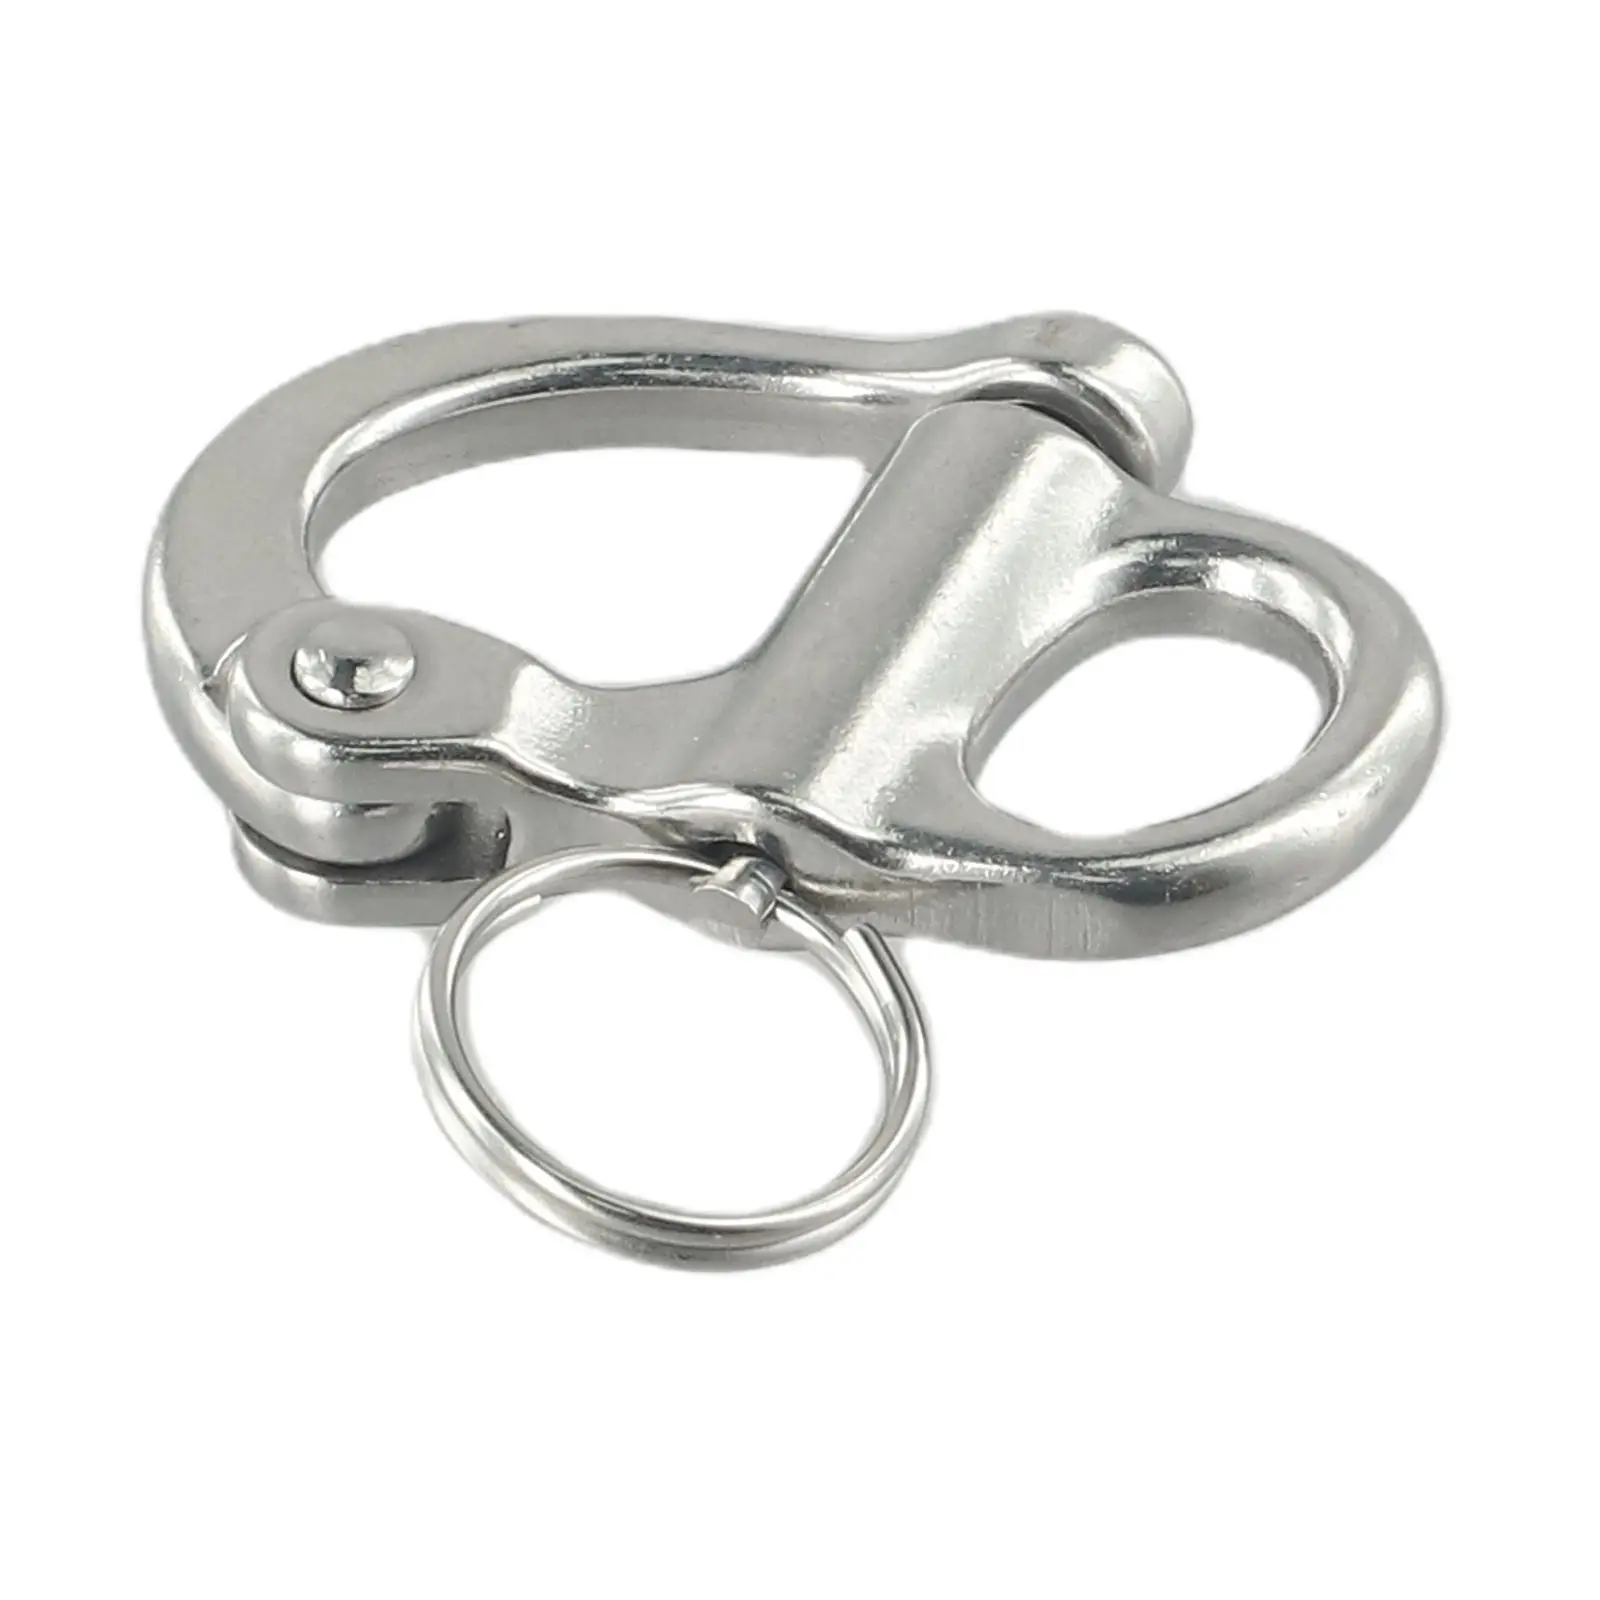 

Parts Shackle Eye Fittings Hook Marine Replacement Silver Snap Stainless Steel Swivel 52mm Accessories Brand New